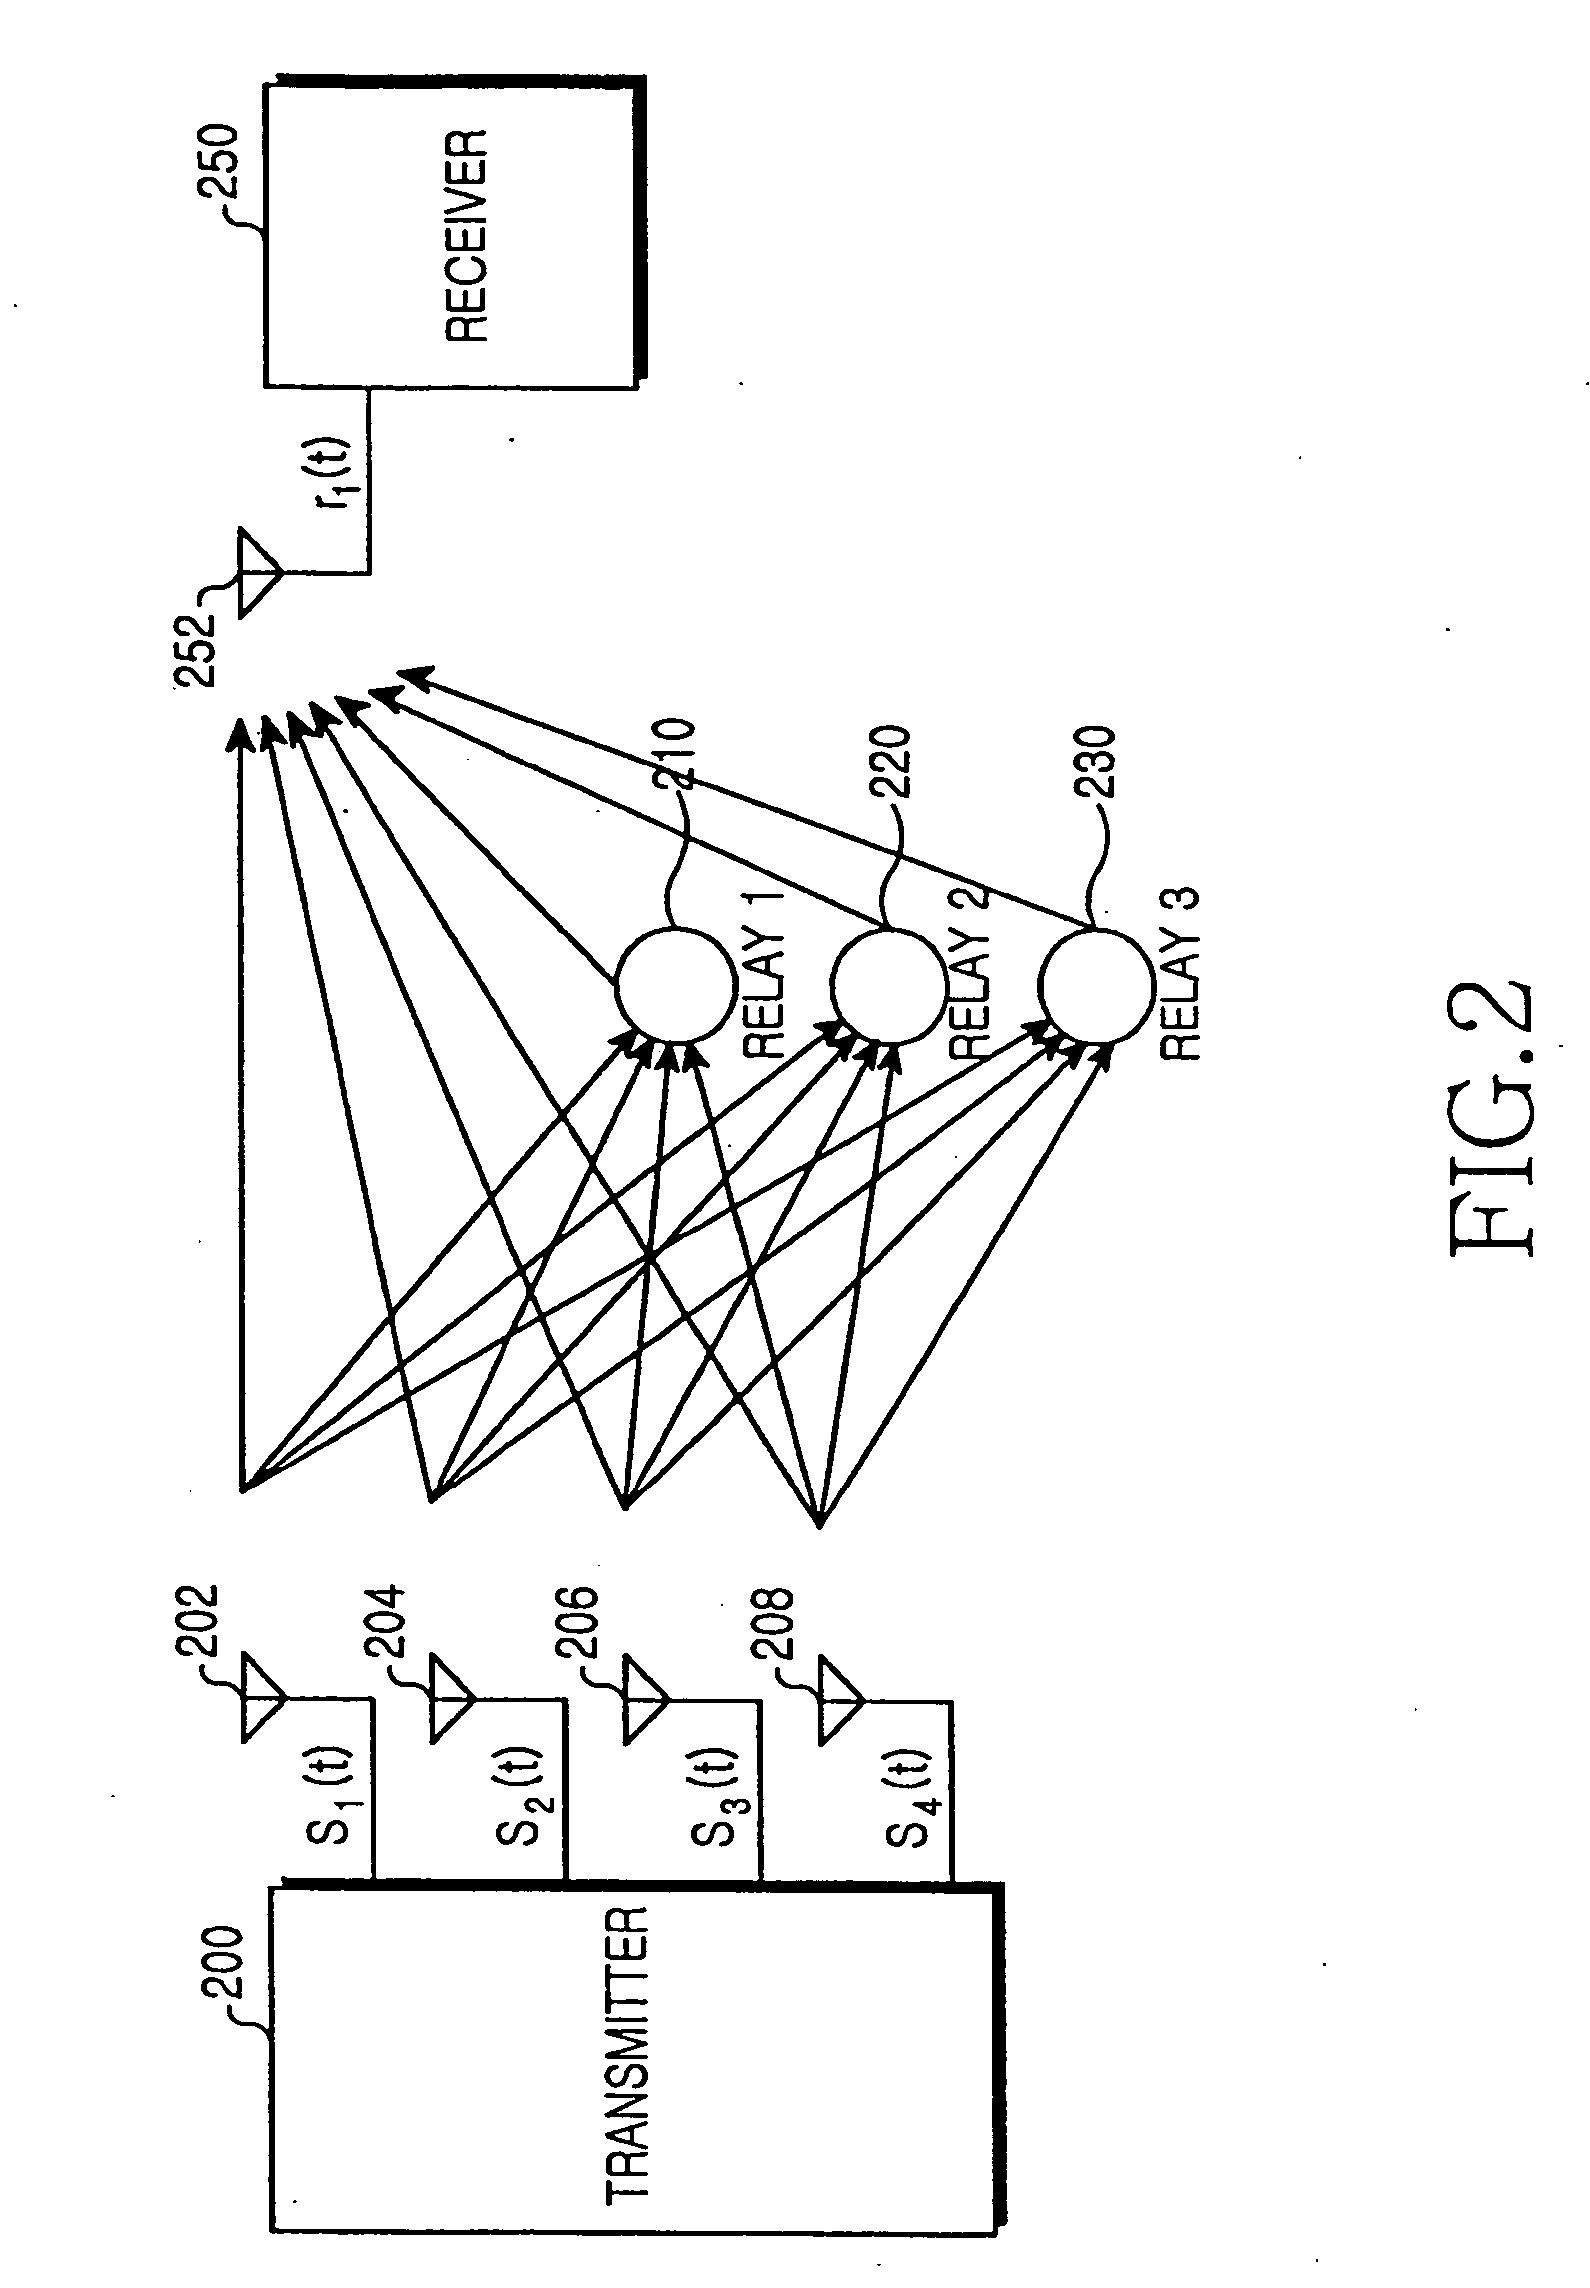 Apparatus and method for high-speed data communication in a mobile communication system with a plurality of transmitting and receiving antennas